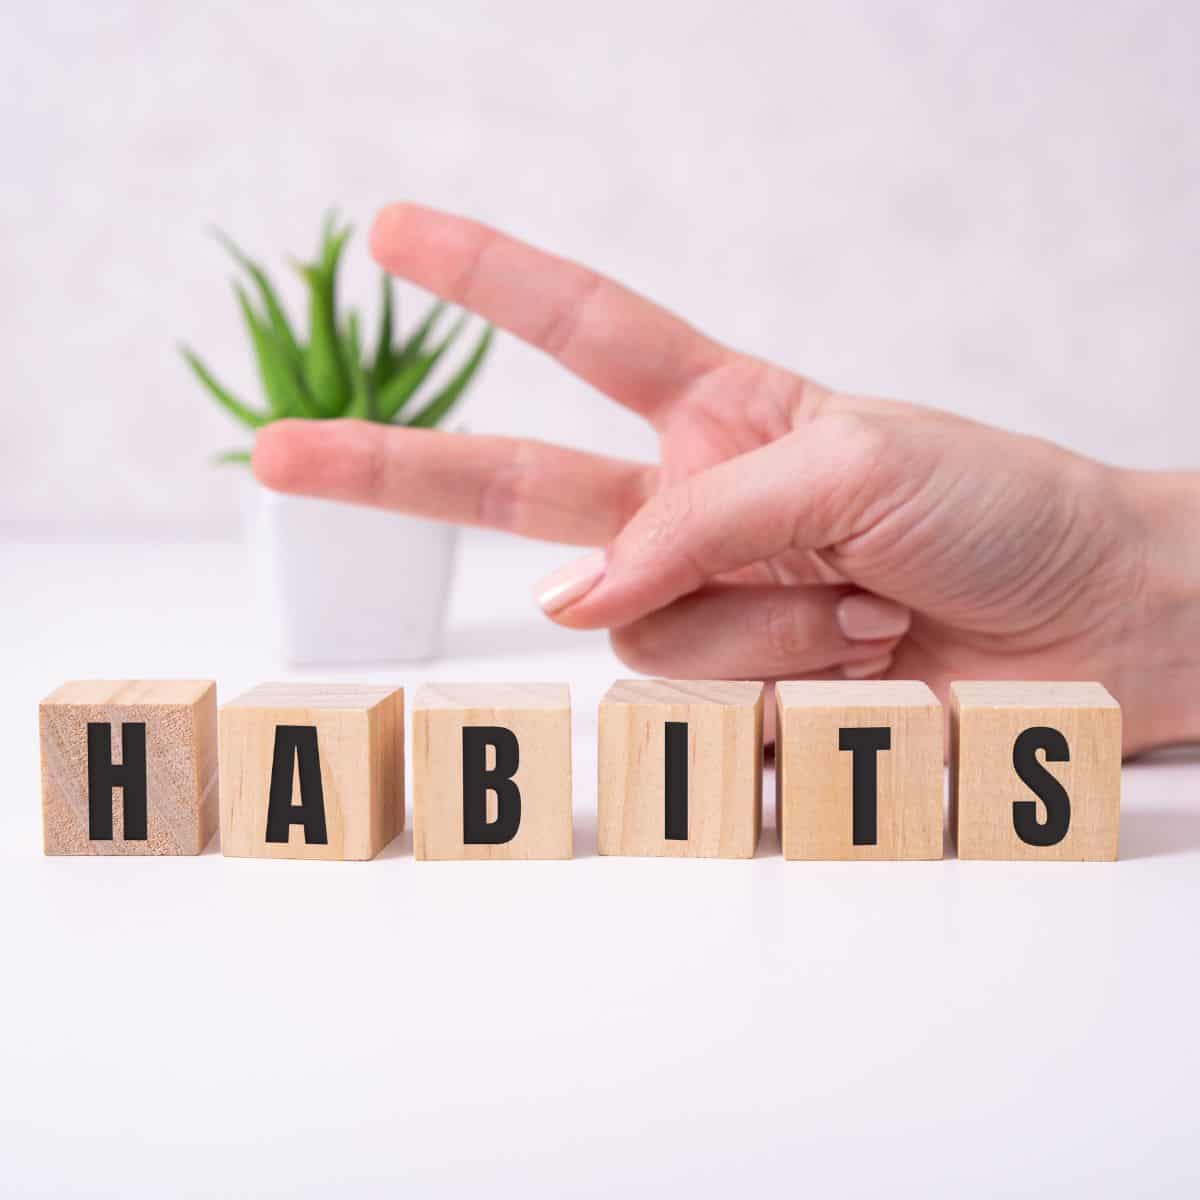 habits spelled out on blocks